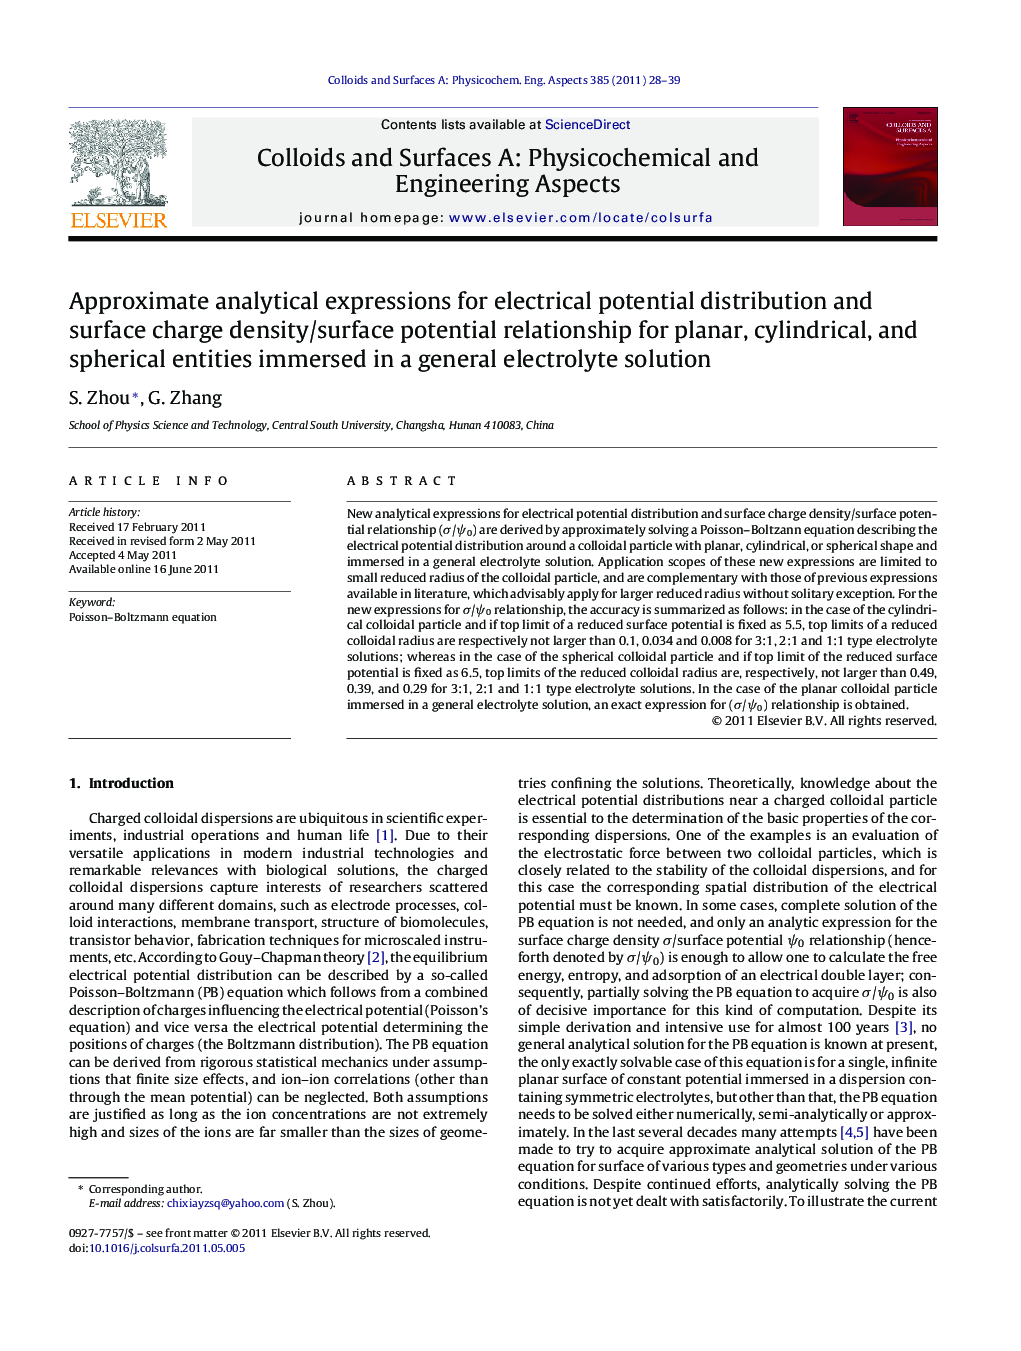 Approximate analytical expressions for electrical potential distribution and surface charge density/surface potential relationship for planar, cylindrical, and spherical entities immersed in a general electrolyte solution